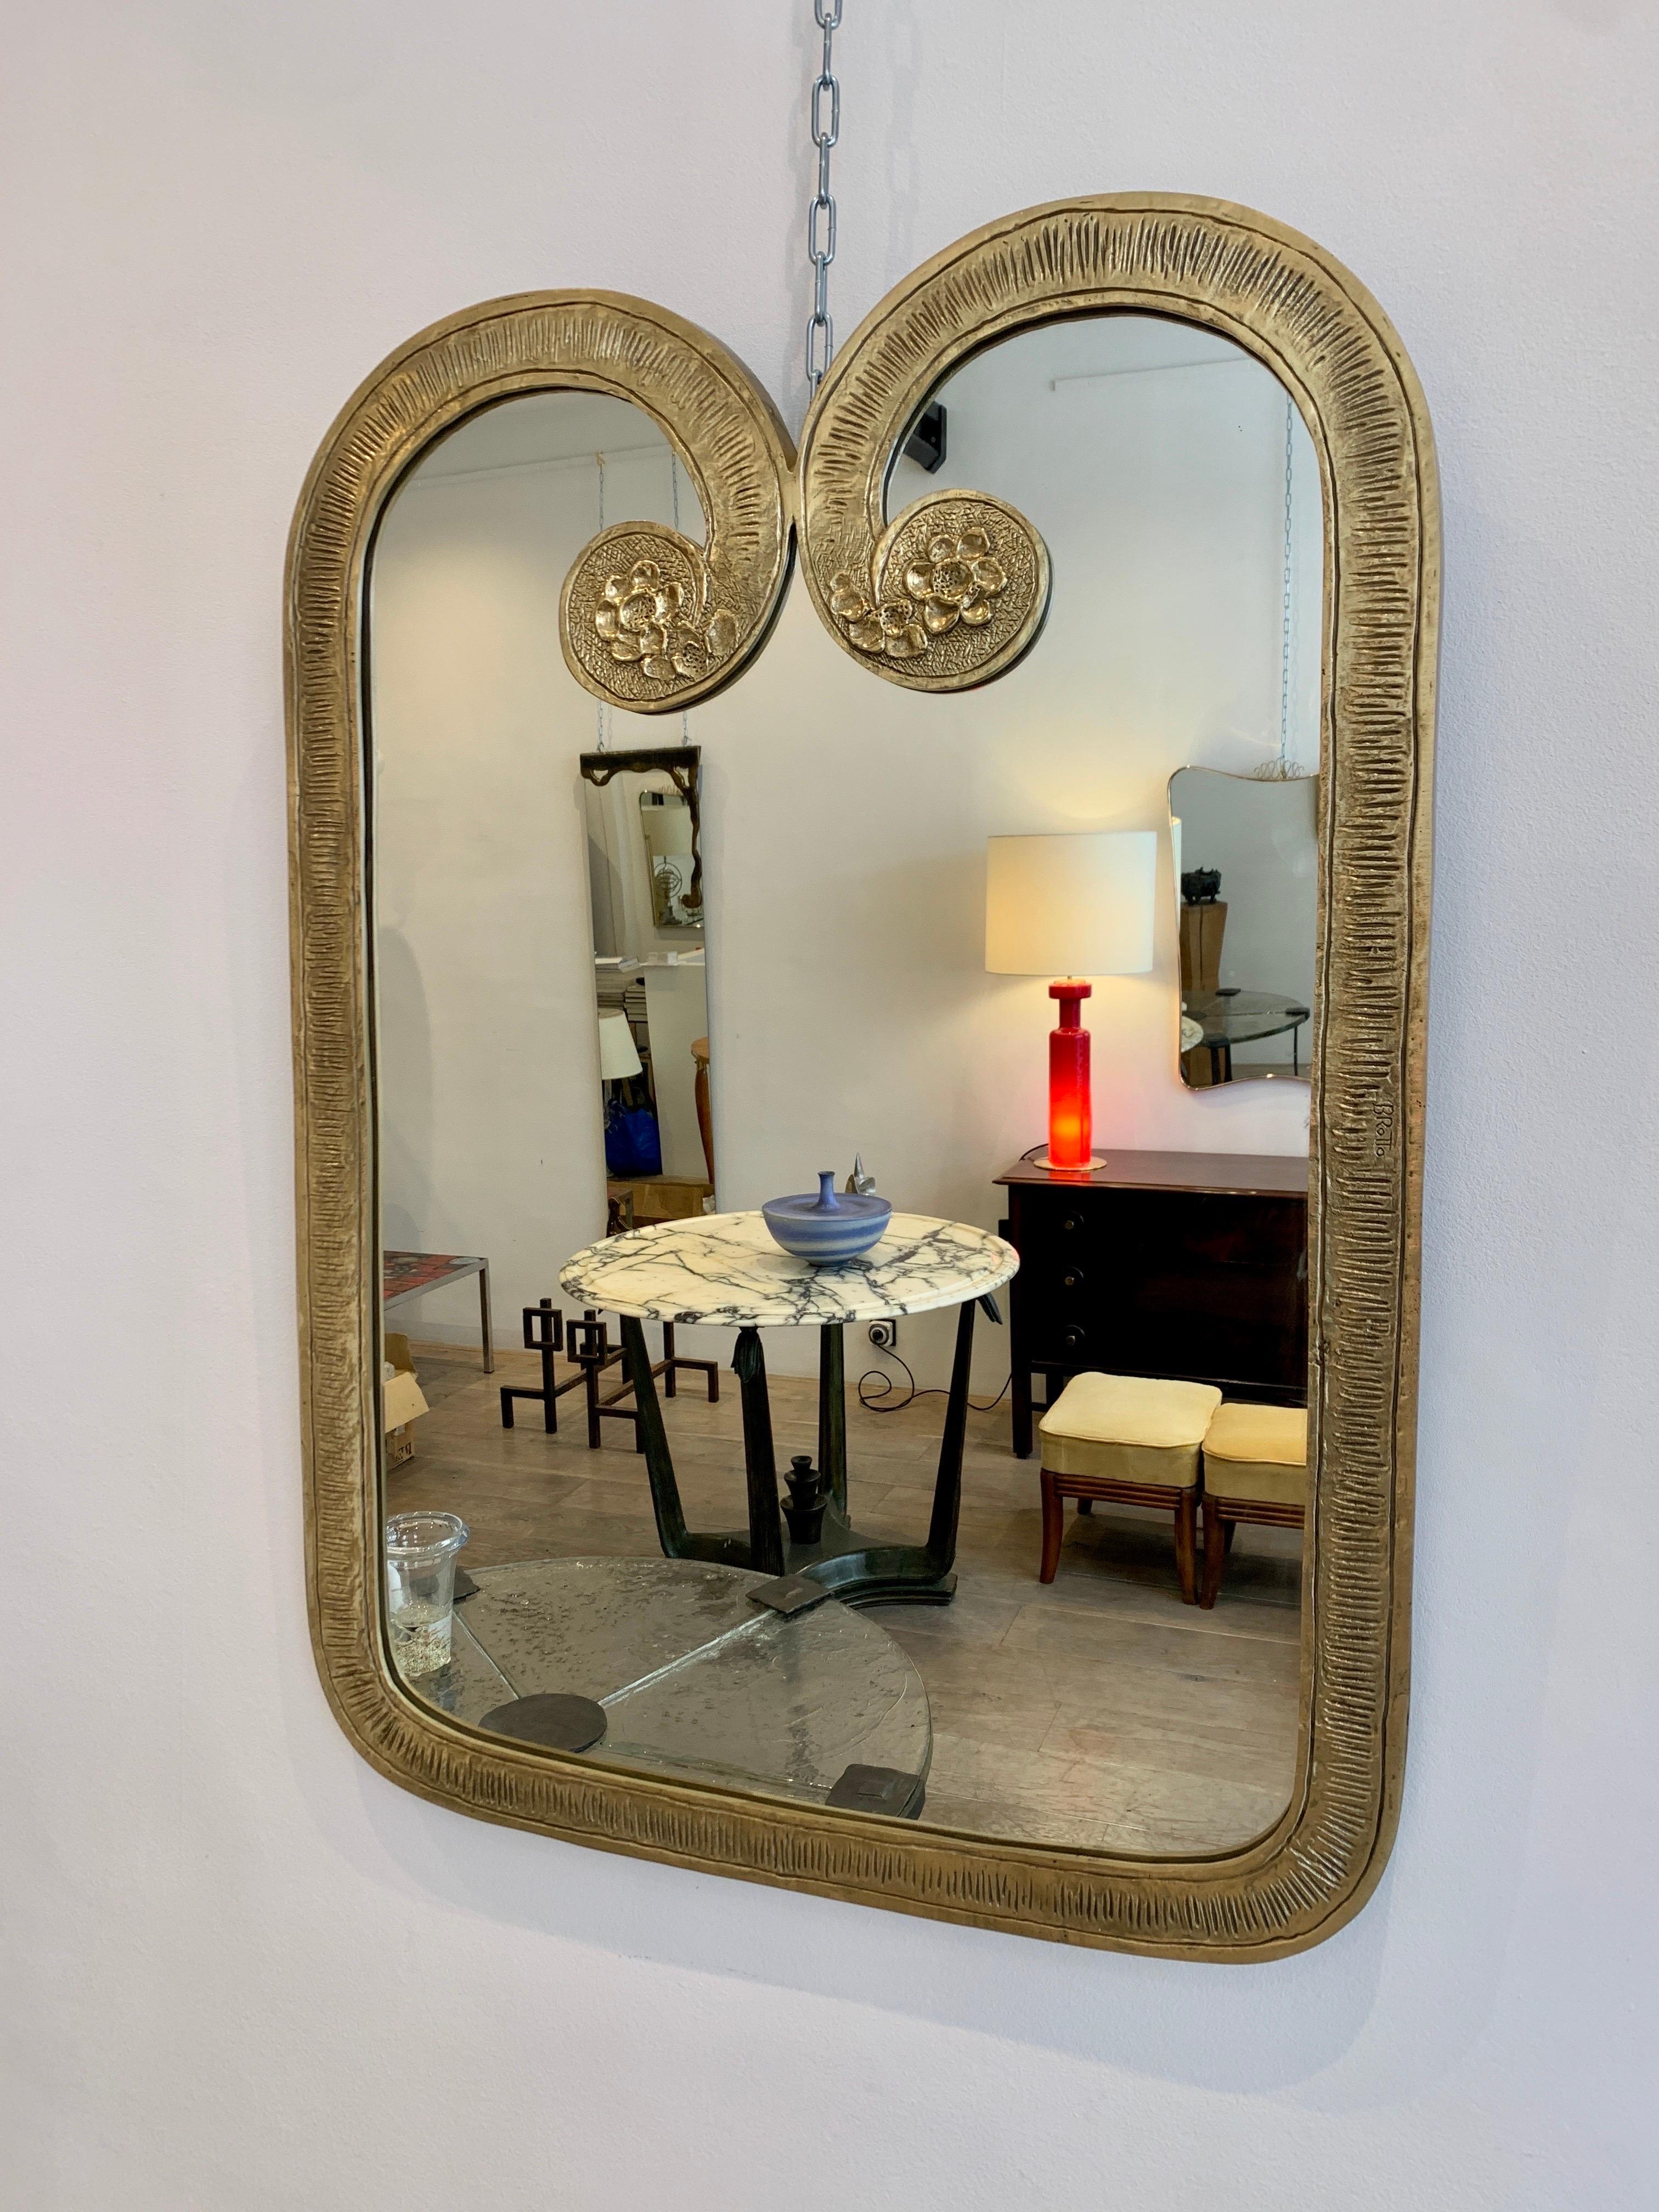 Angelo Brotto is a famous Italian designer, who specialized in lights and wall decoration. This mirror, which is signed, is a rare piece and quite elegant. It unites artistic creation and decorative qualities. 